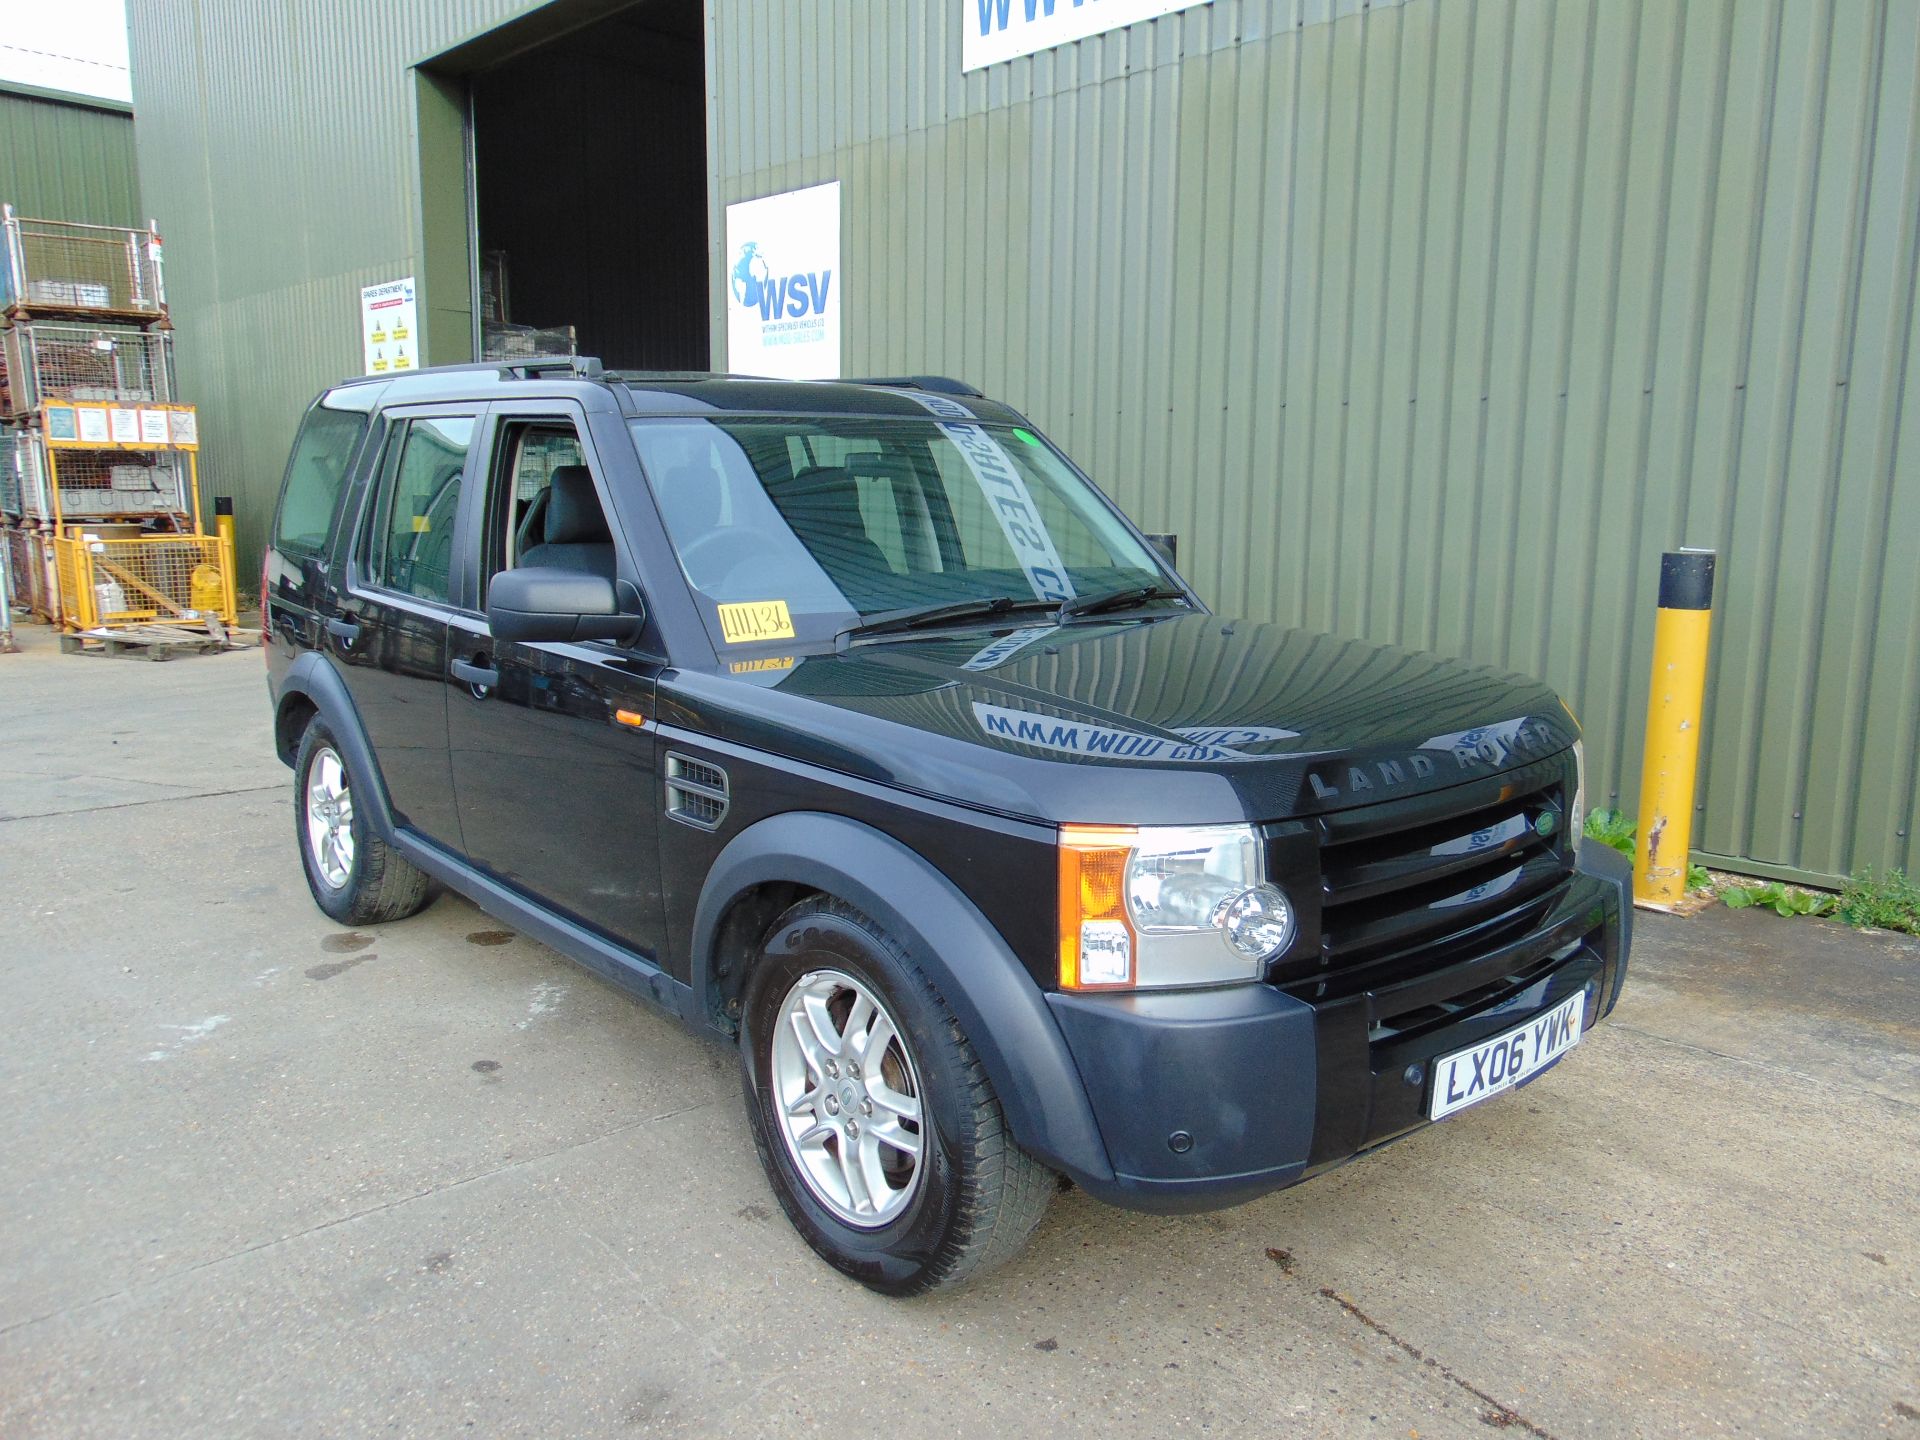 2006 Land Rover Discovery 3 TDV6 2.7 Ltr Auto - 4WD - 5 dr 7 Seater - Black - Image 6 of 49